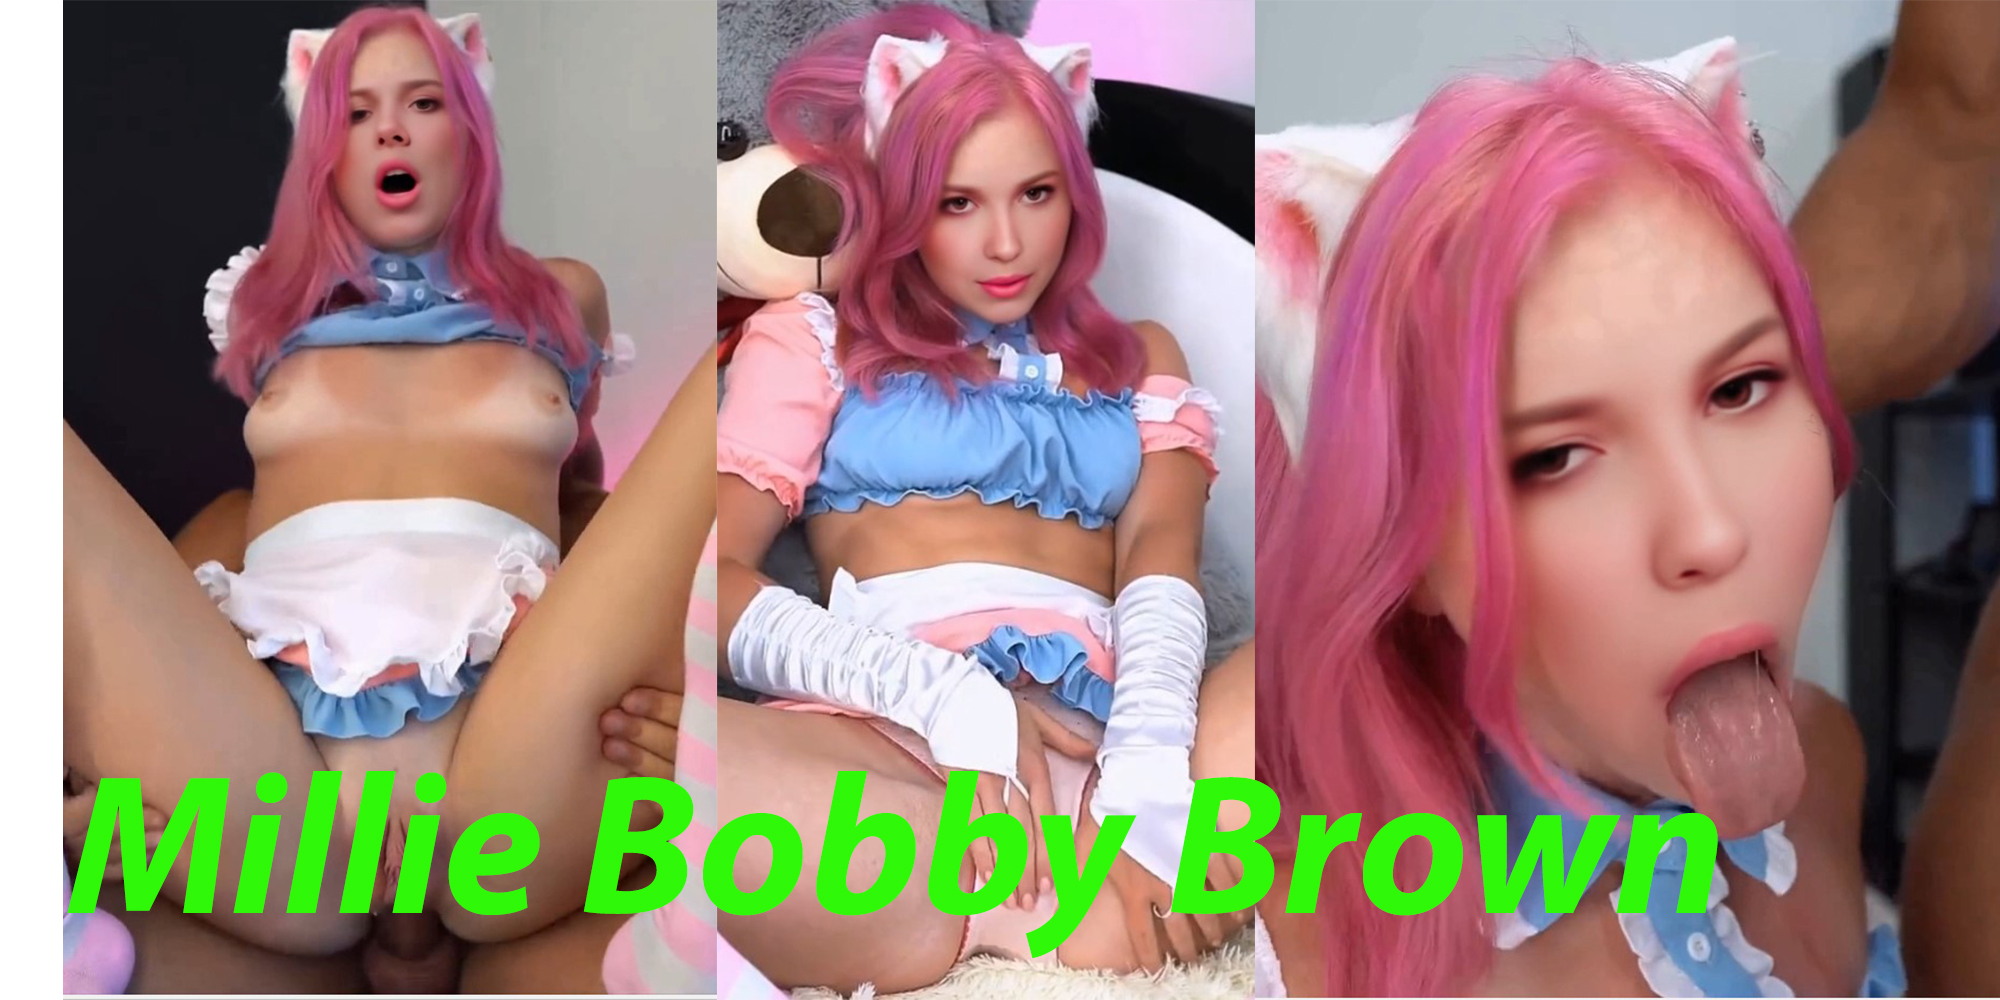 Millie Bobby Brown Sweet pink kitty